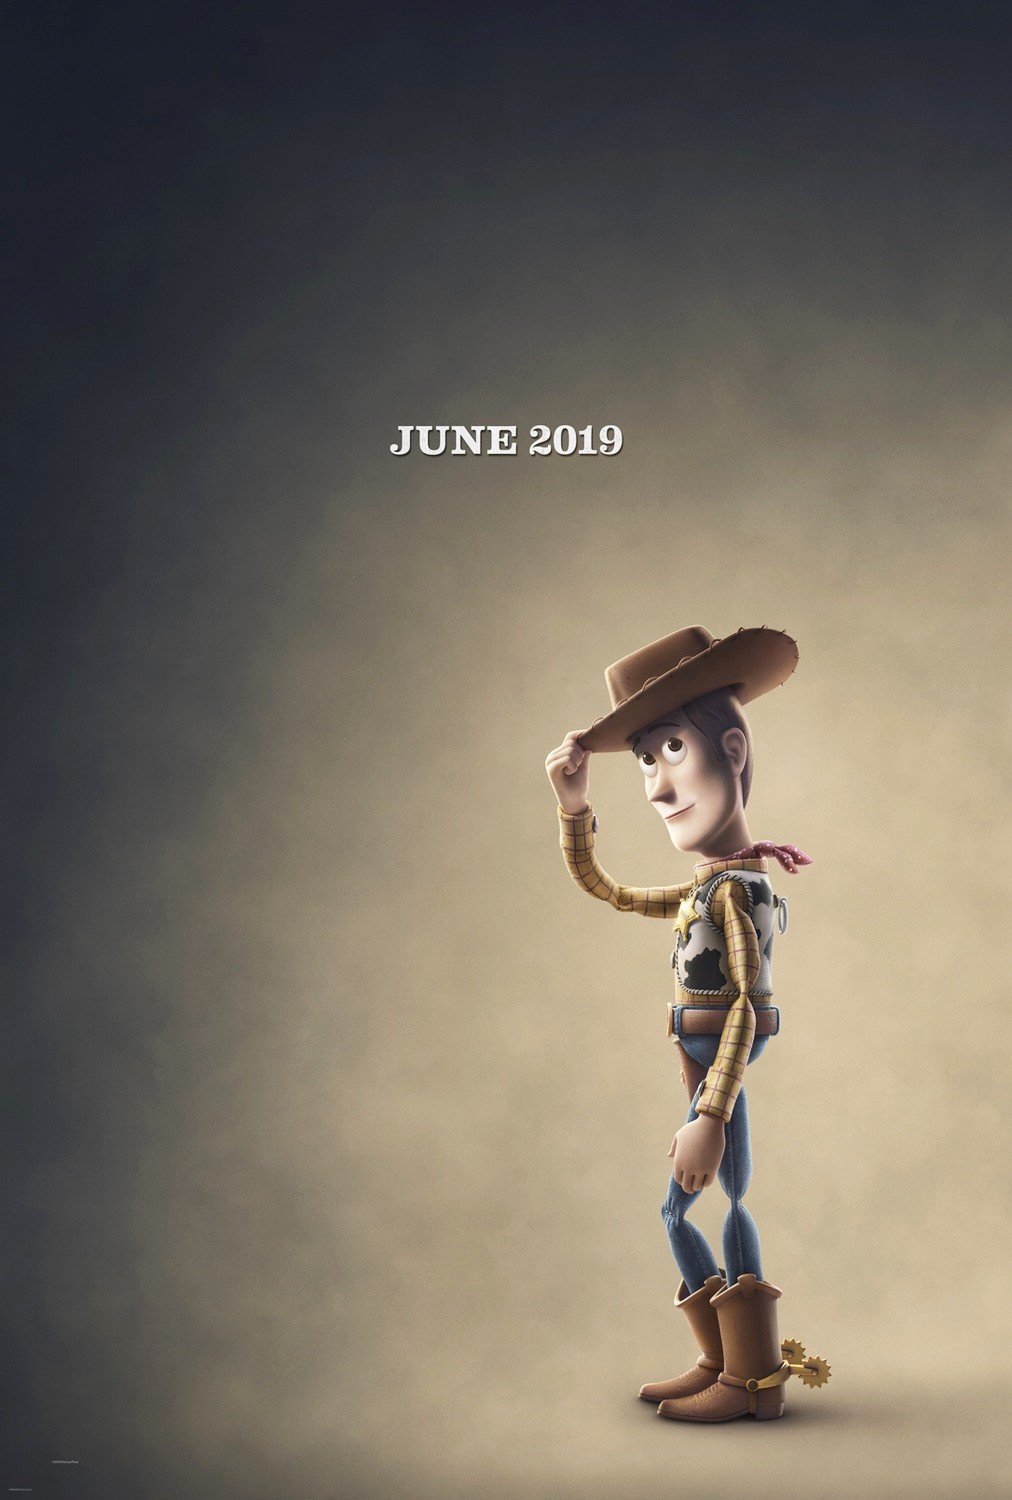 Poster of Pixar Animation Studios' Toy Story 4 (2019)